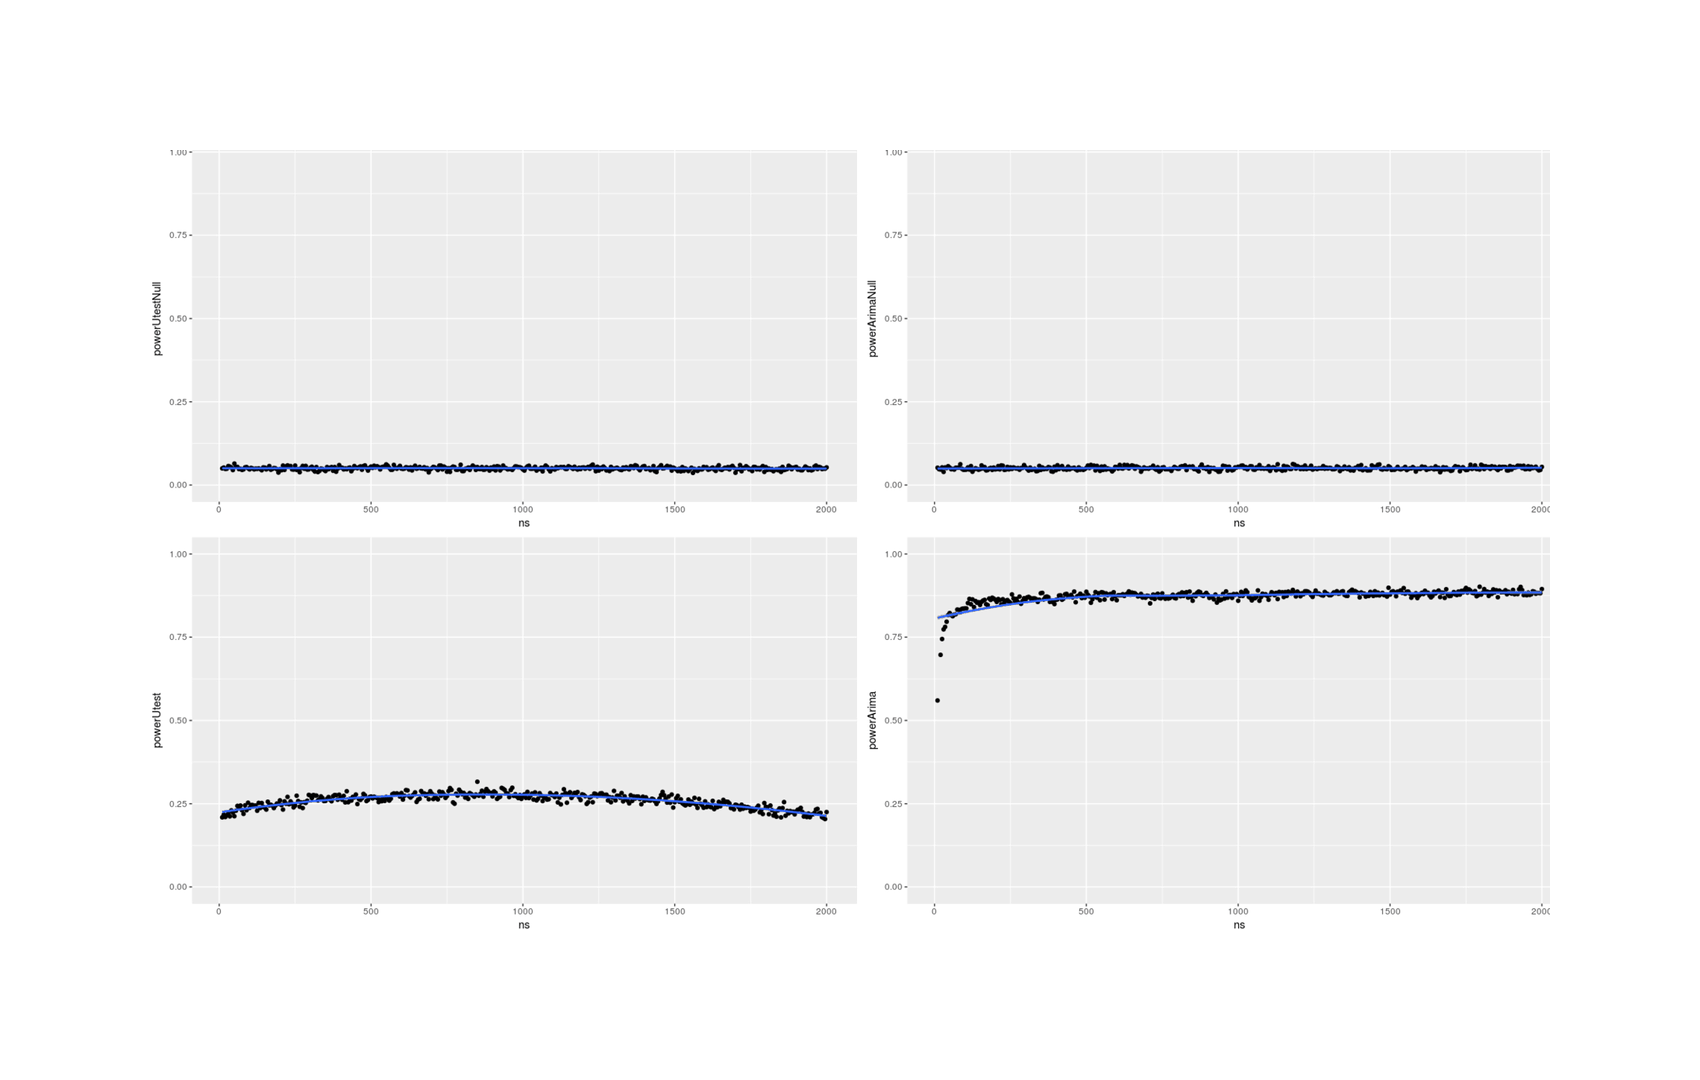 Block-bootstrap power analysis of ability to detect 2.8% traffic reduction using u-test & ARIMA time-series model (bottom row), while preserving nominal false-positive error control (top row)